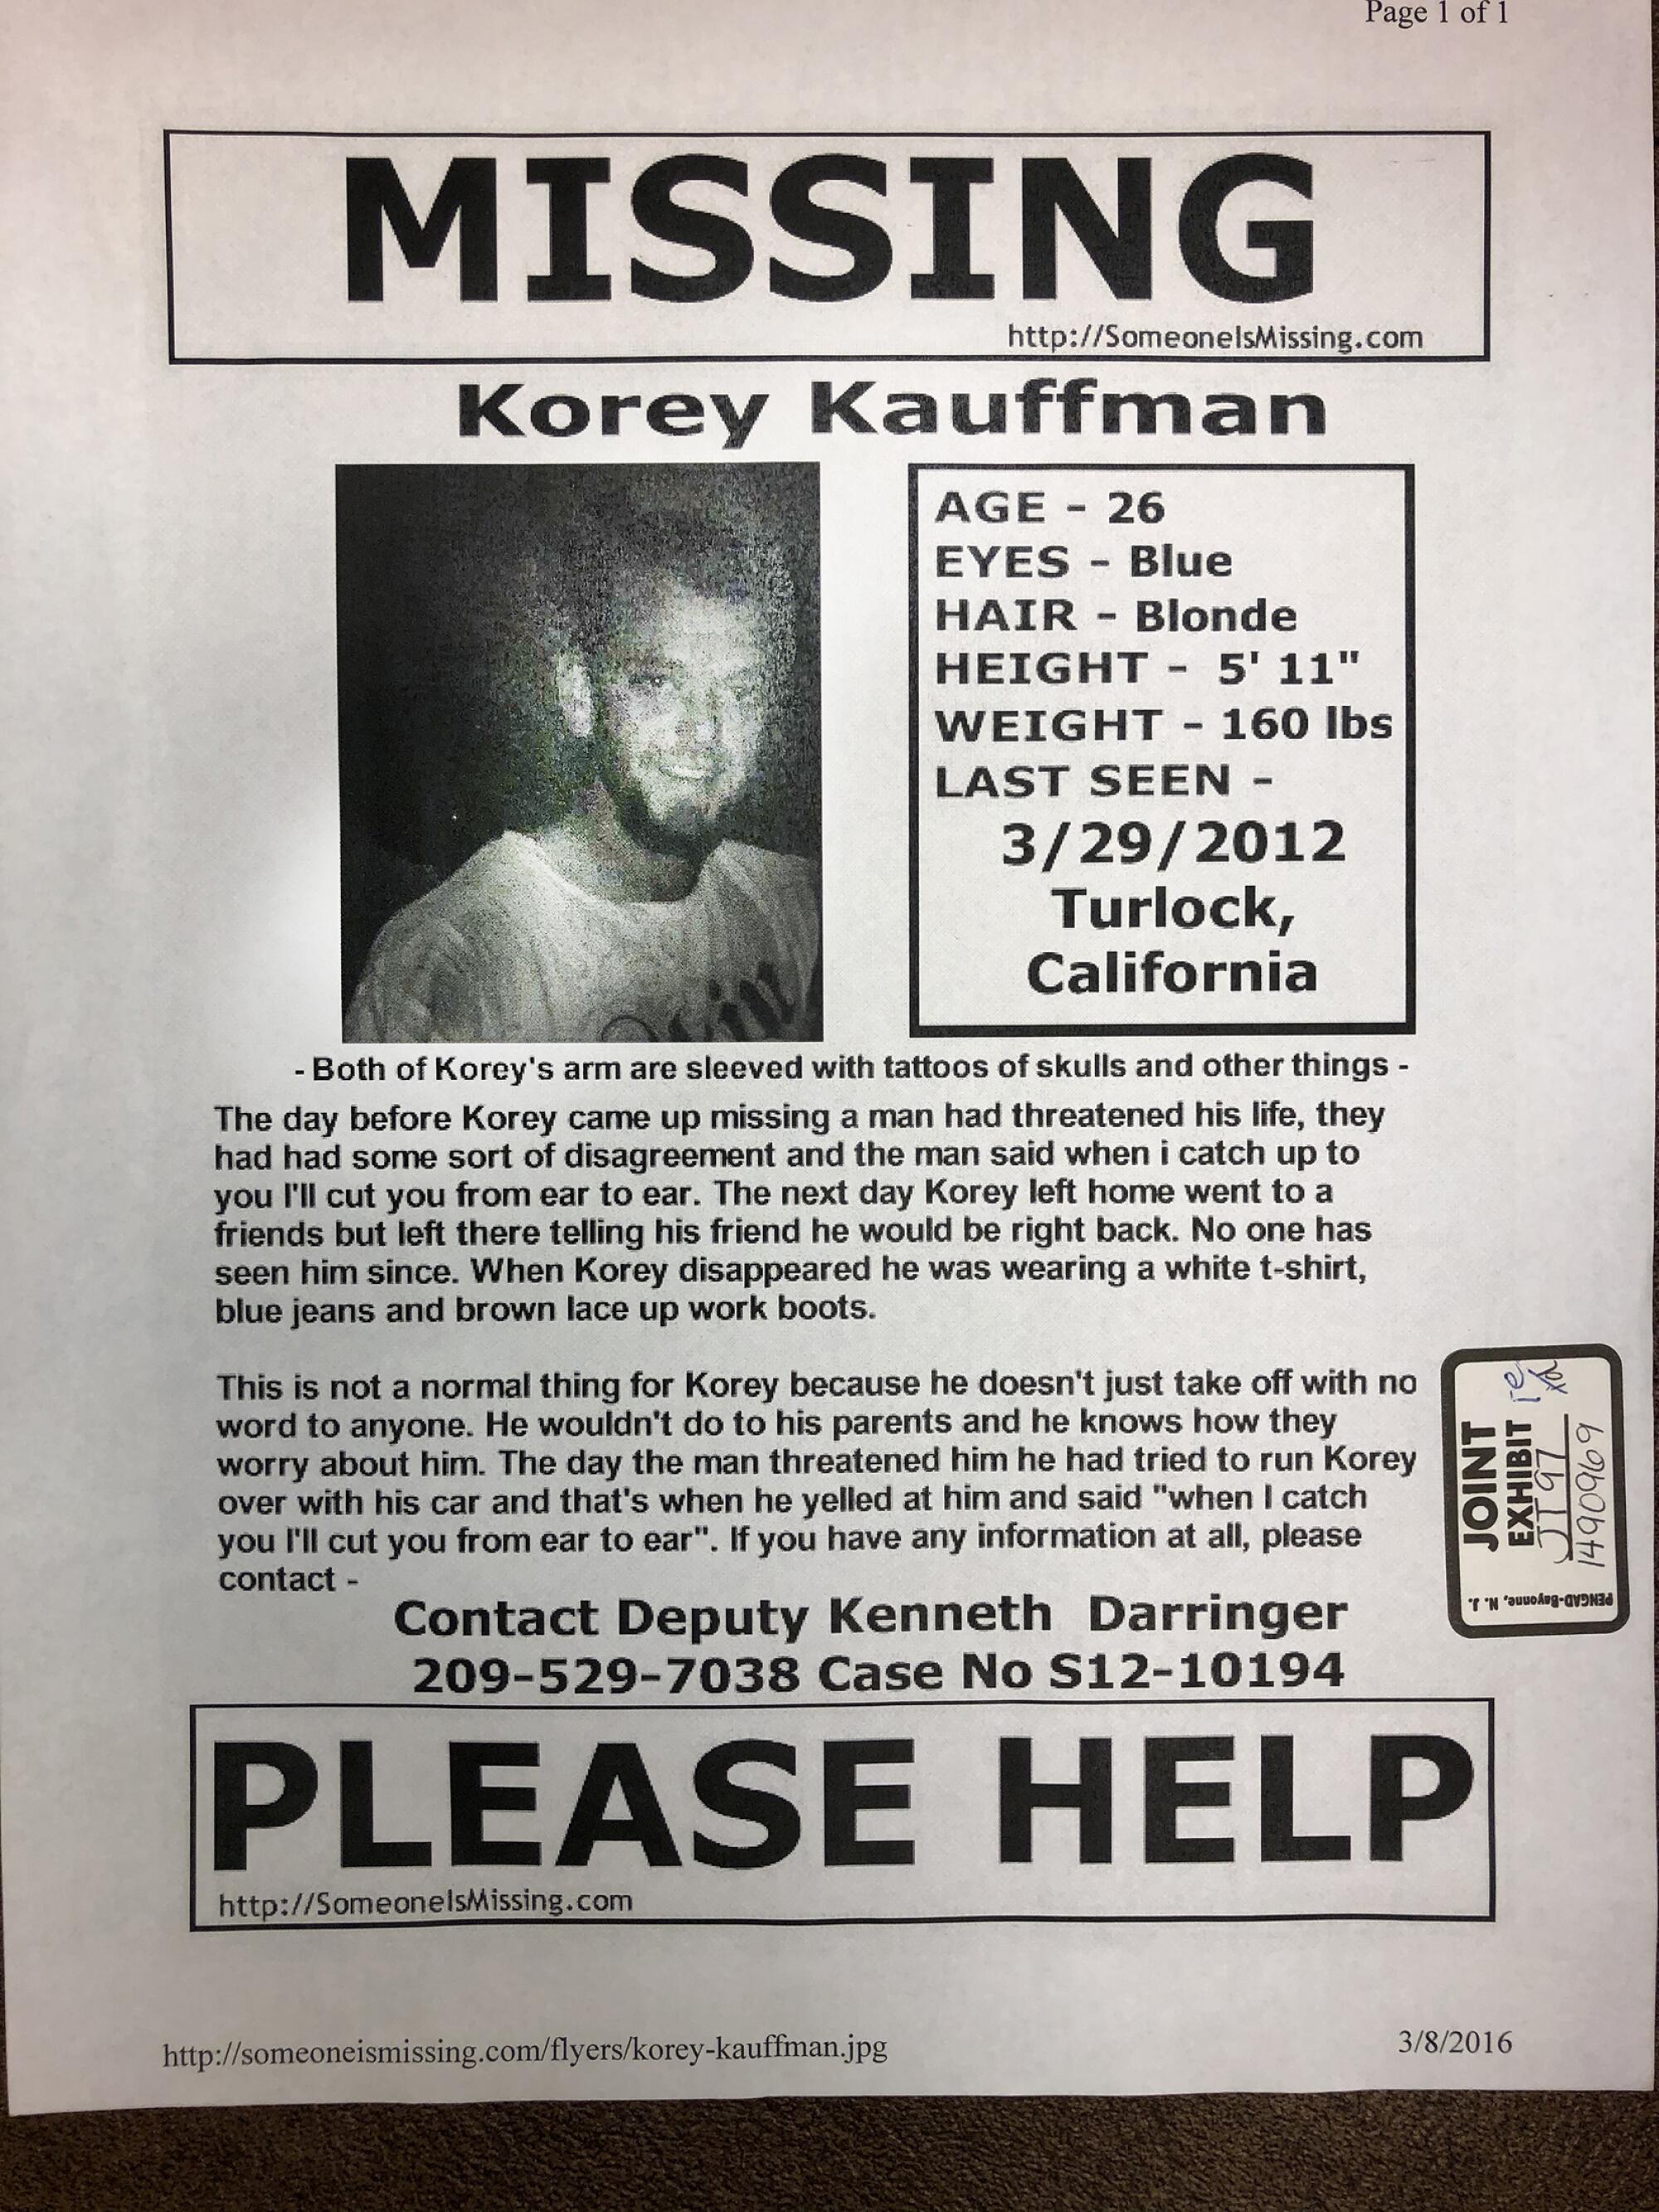 A flier from 2012 seeking help on the whereabouts of Korey Kauffman.